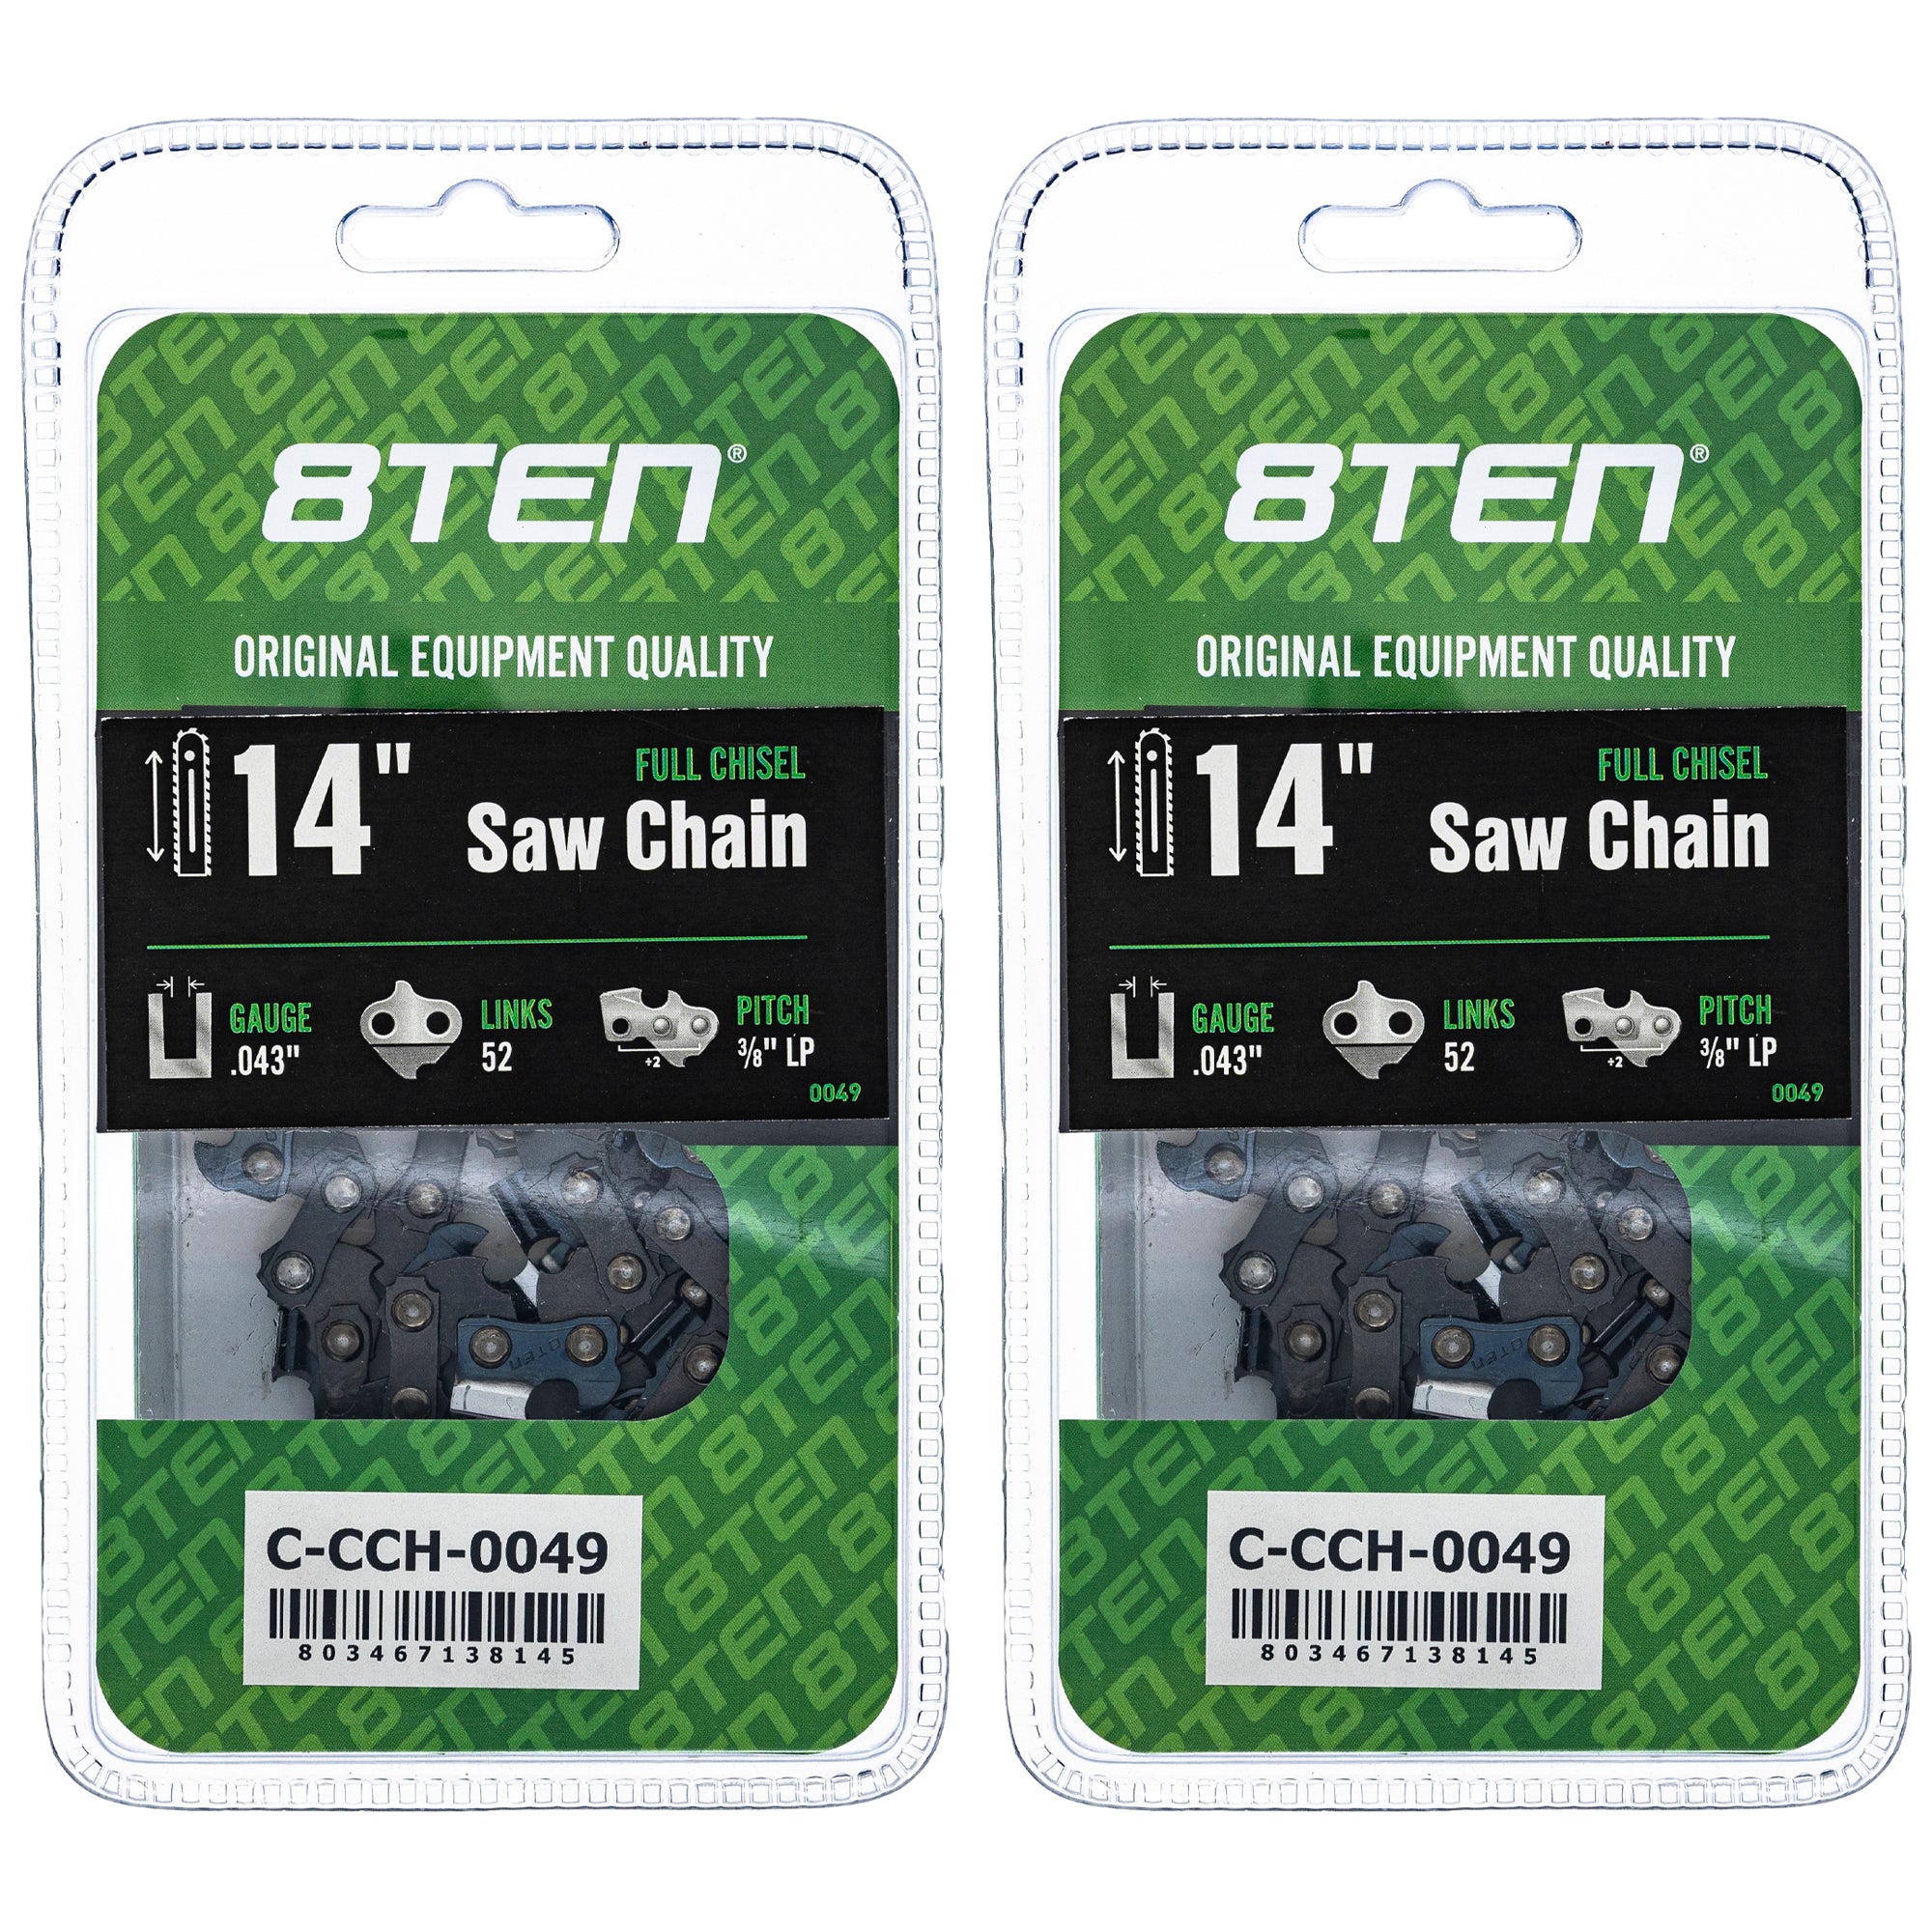 Chainsaw Chain 14 Inch .043 3/8 LP 52DL 2-Pack for zOTHER Champion XCU04 XCU03 T536 8TEN 810-CCC2261H